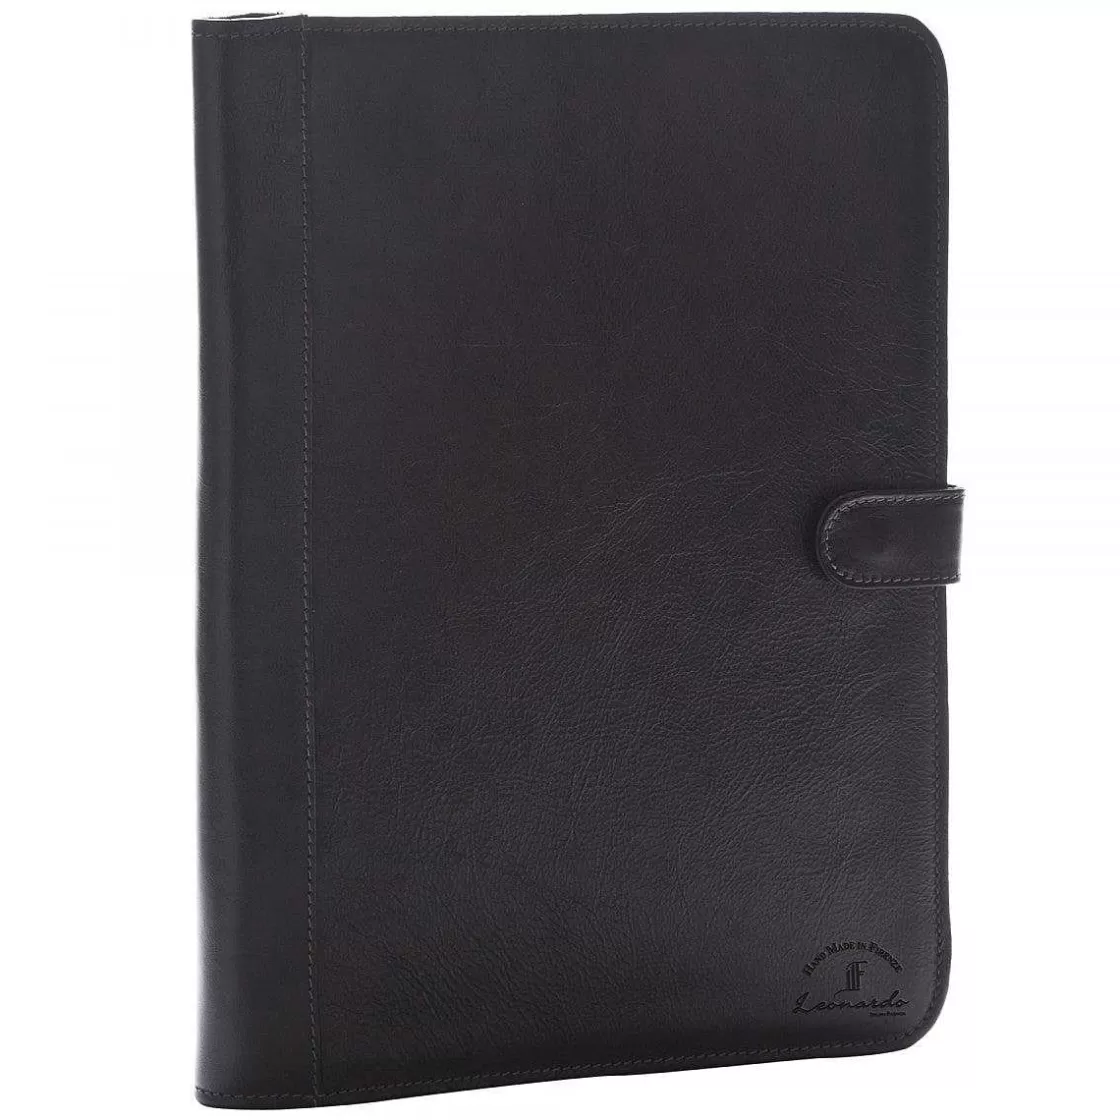 Leonardo Document Holder In Full Grain Leather With Utility Pockets And Magnetic Closure Fashion